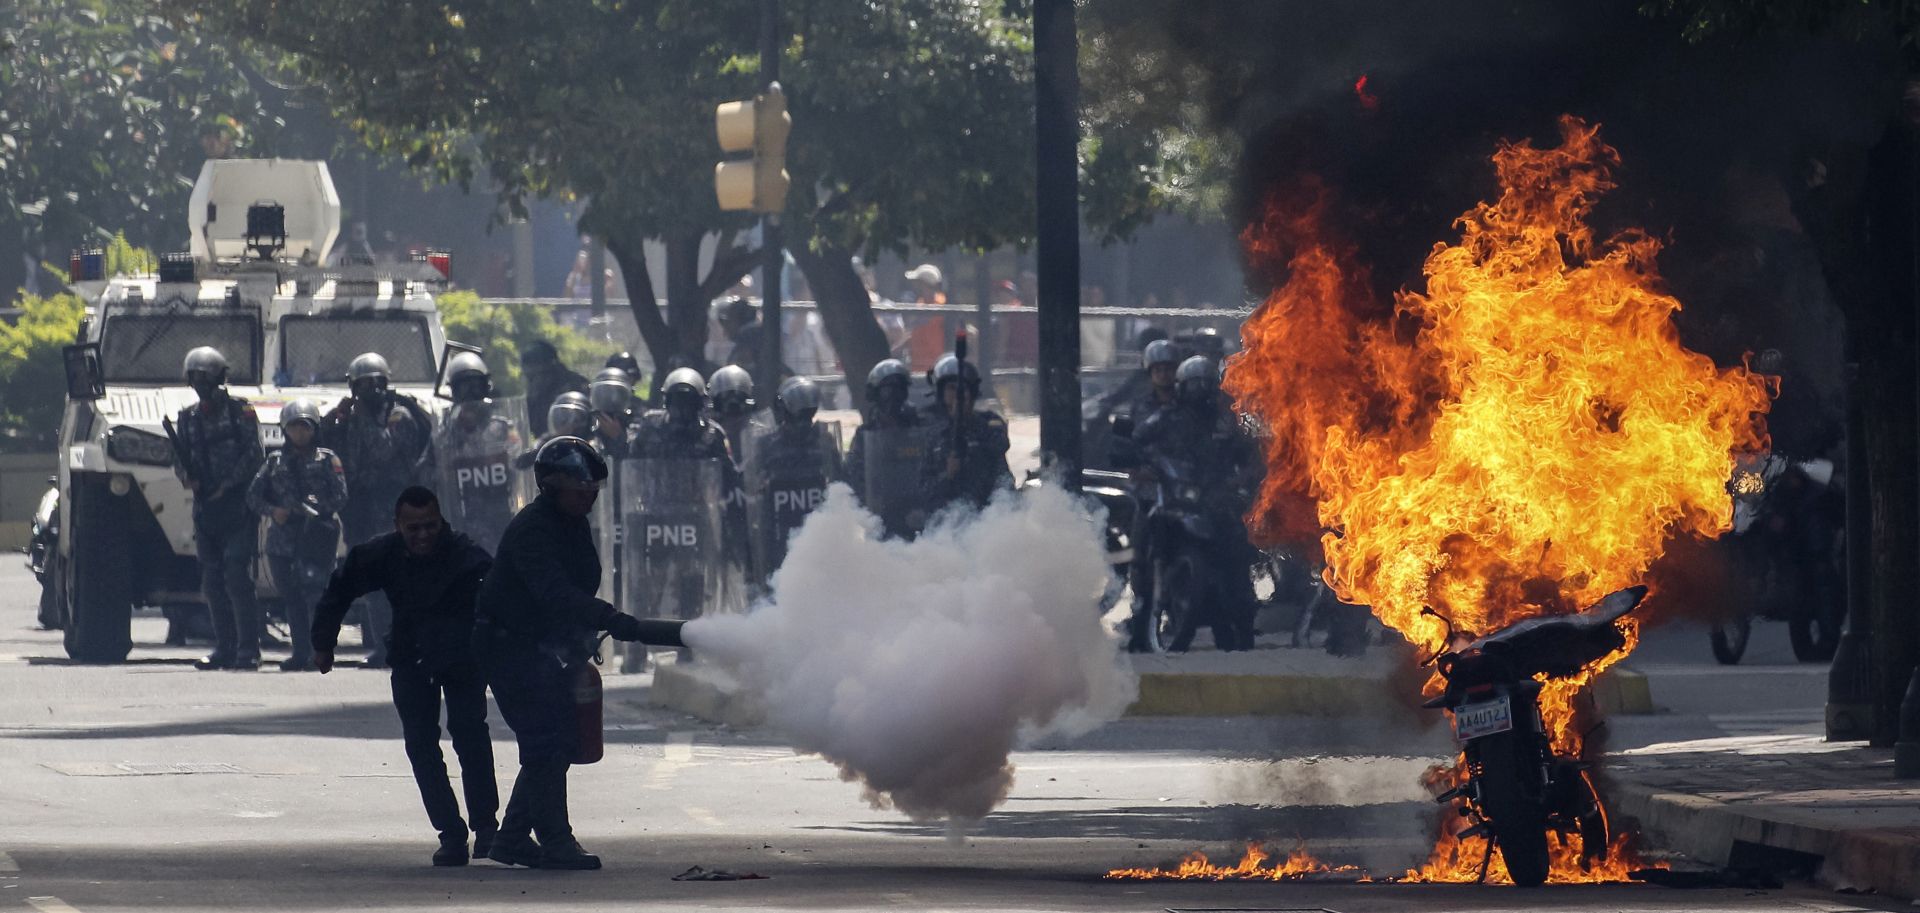 epa06125221 Police try to extinguish a burning motorcycle burns as opposition demonstrators protest the National Constituent Assembly in Caracas, Venezuela, 04 August 2017. Venezuela is installing the 500 member assembly denounced by opposition groups and international leaders and which will rewrite the constitution.  EPA/Miguel Gutierrez